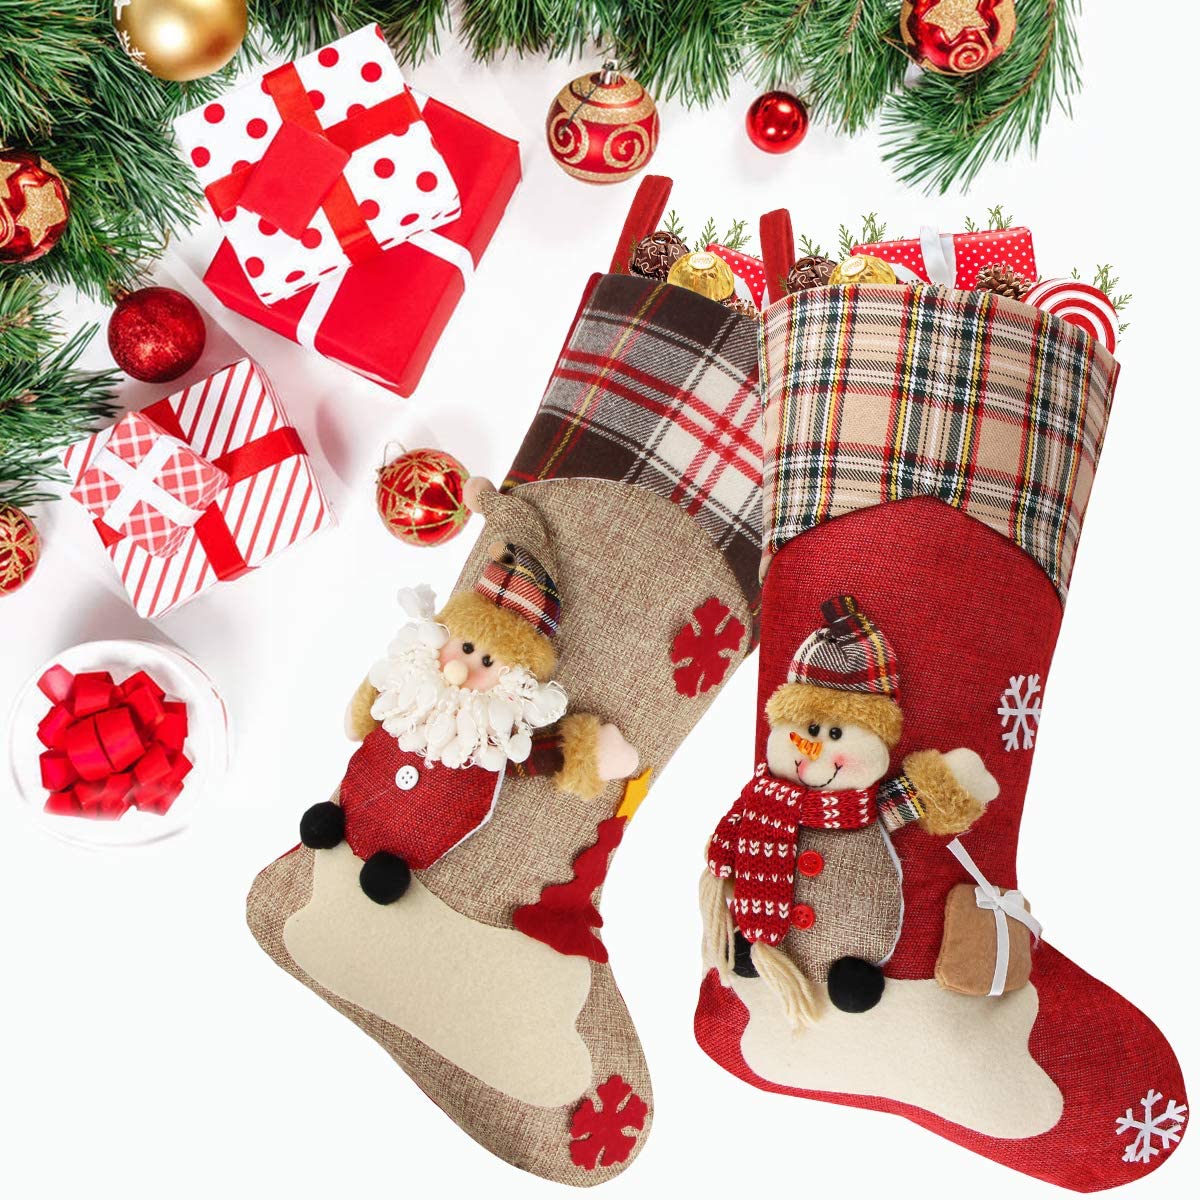 Reindeer Xmas Character 3D Plush Stockings Xmas Classic Decoration for Family Holiday Christmas Party Decorations Snowman Diamerd Christmas Stocking 3 Pack 17.3 Santa